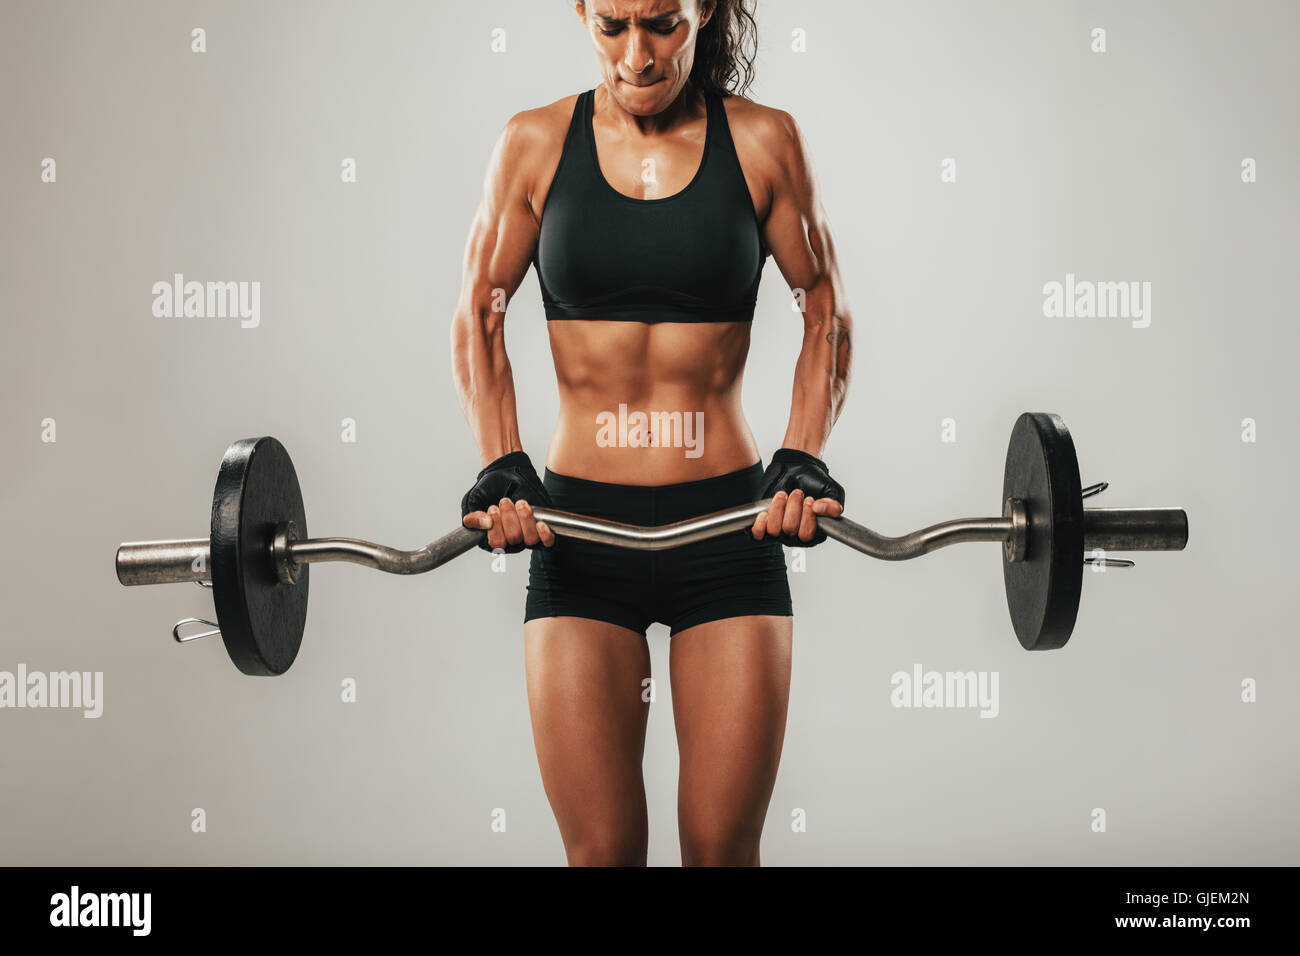 Muscles buldging on arms of muscular young woman using barbell weight Stock Photo